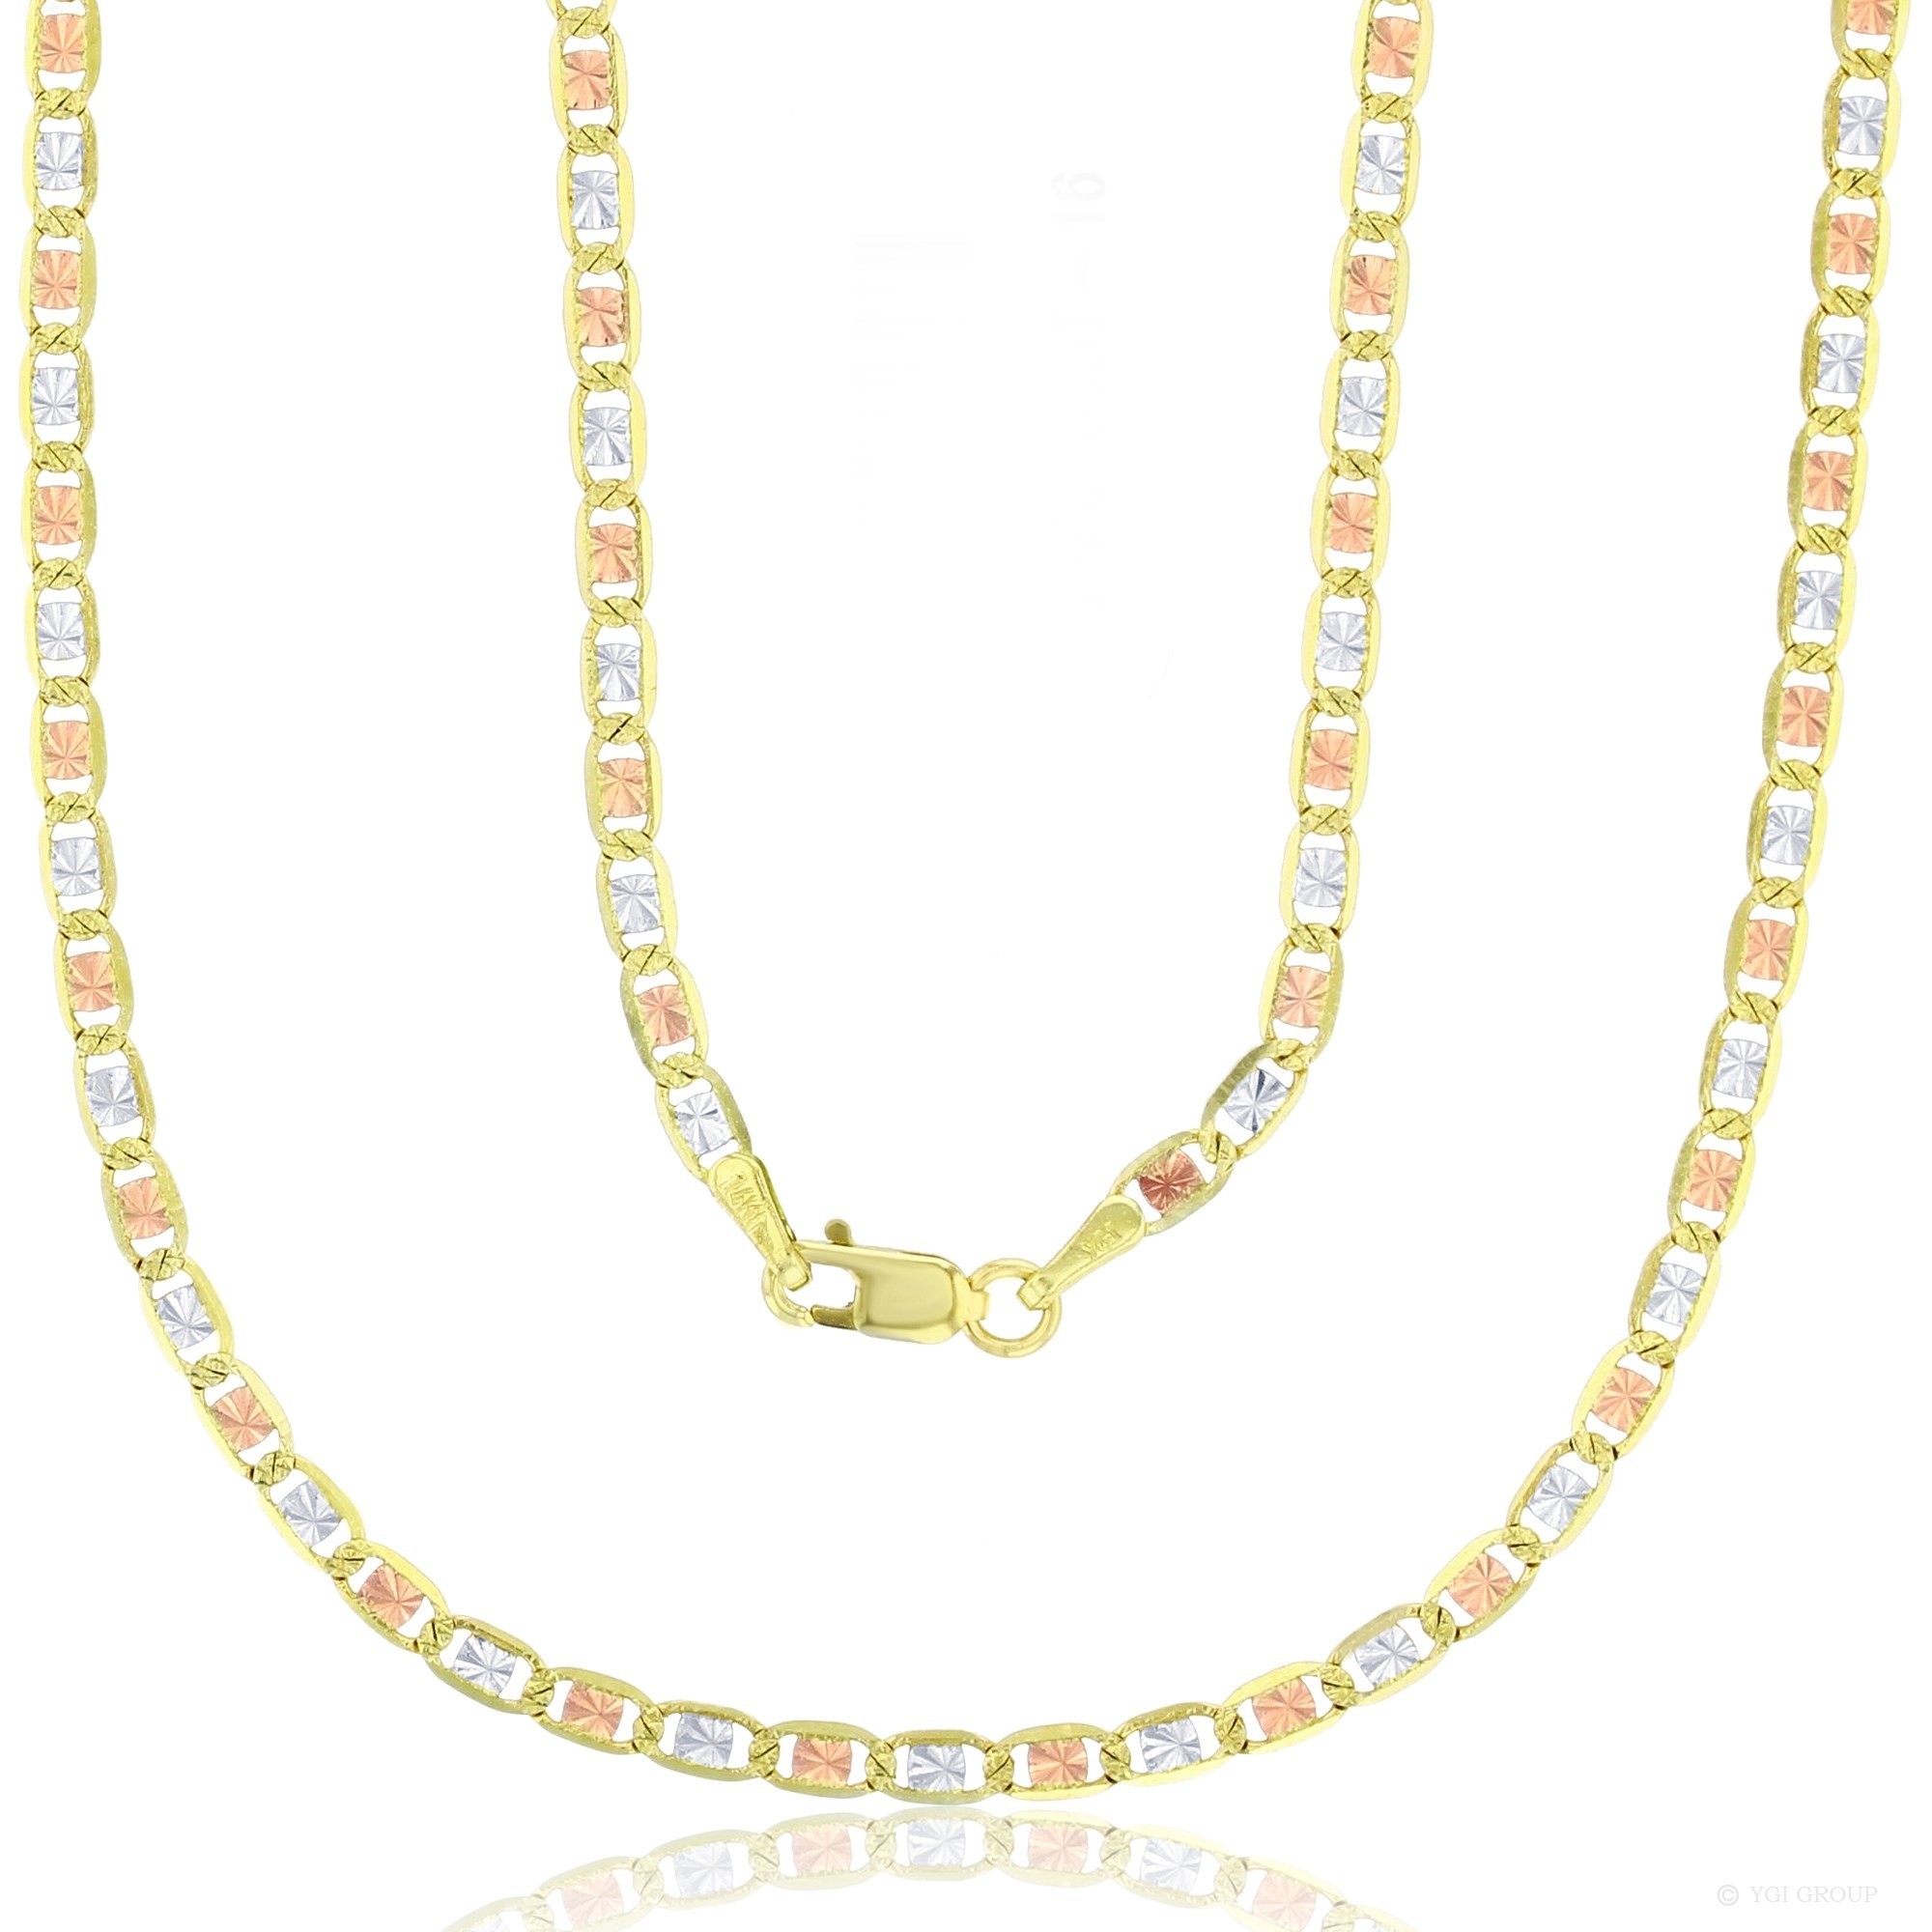 14KT Gold 24" Tricolor Valentino Star DC Chain 060 Gauge 2.75MM